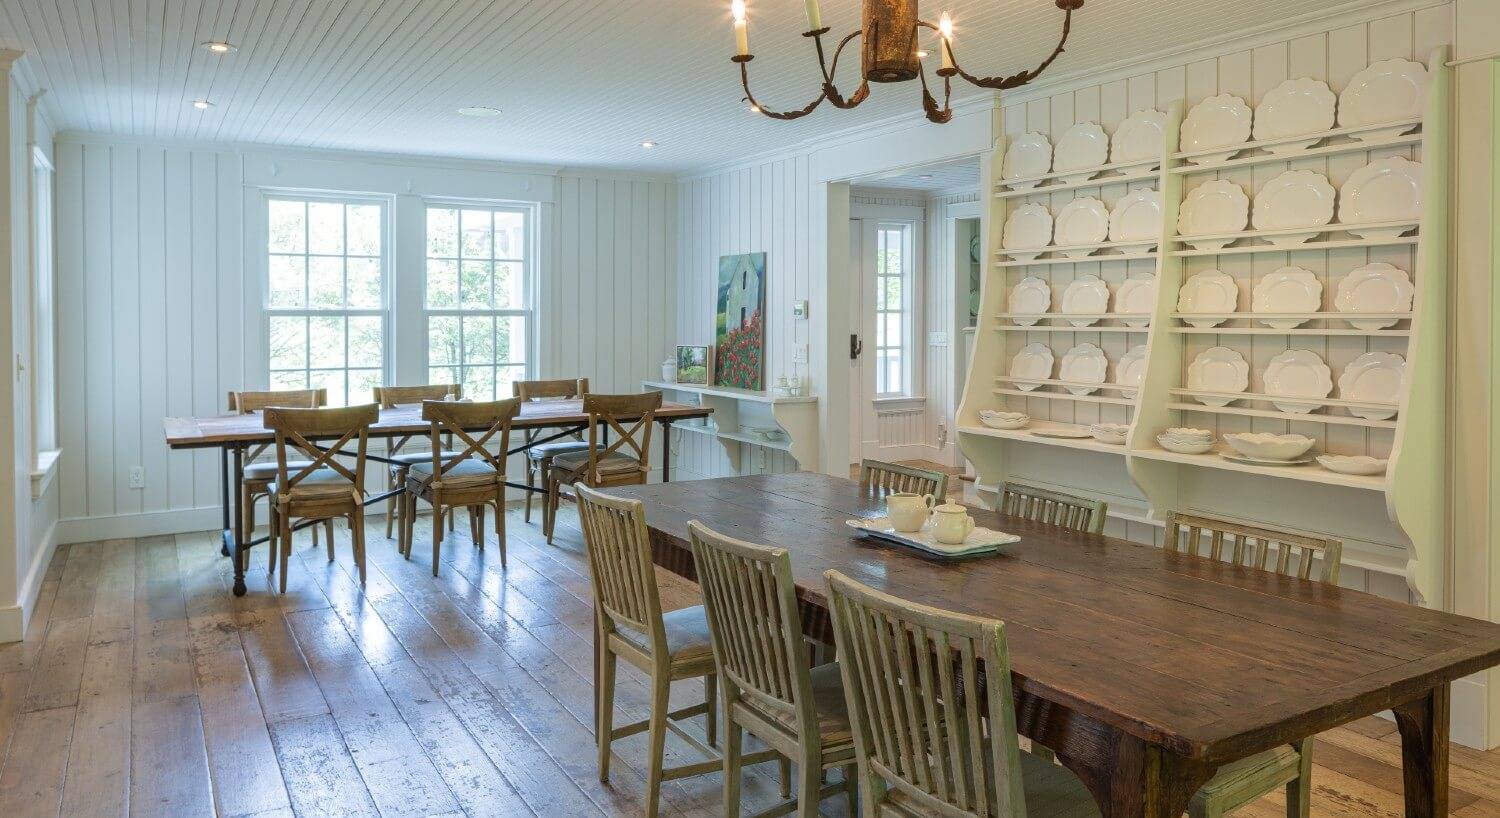 Large dining room of a home with two tables for six and plate rack on a wall full of white plates